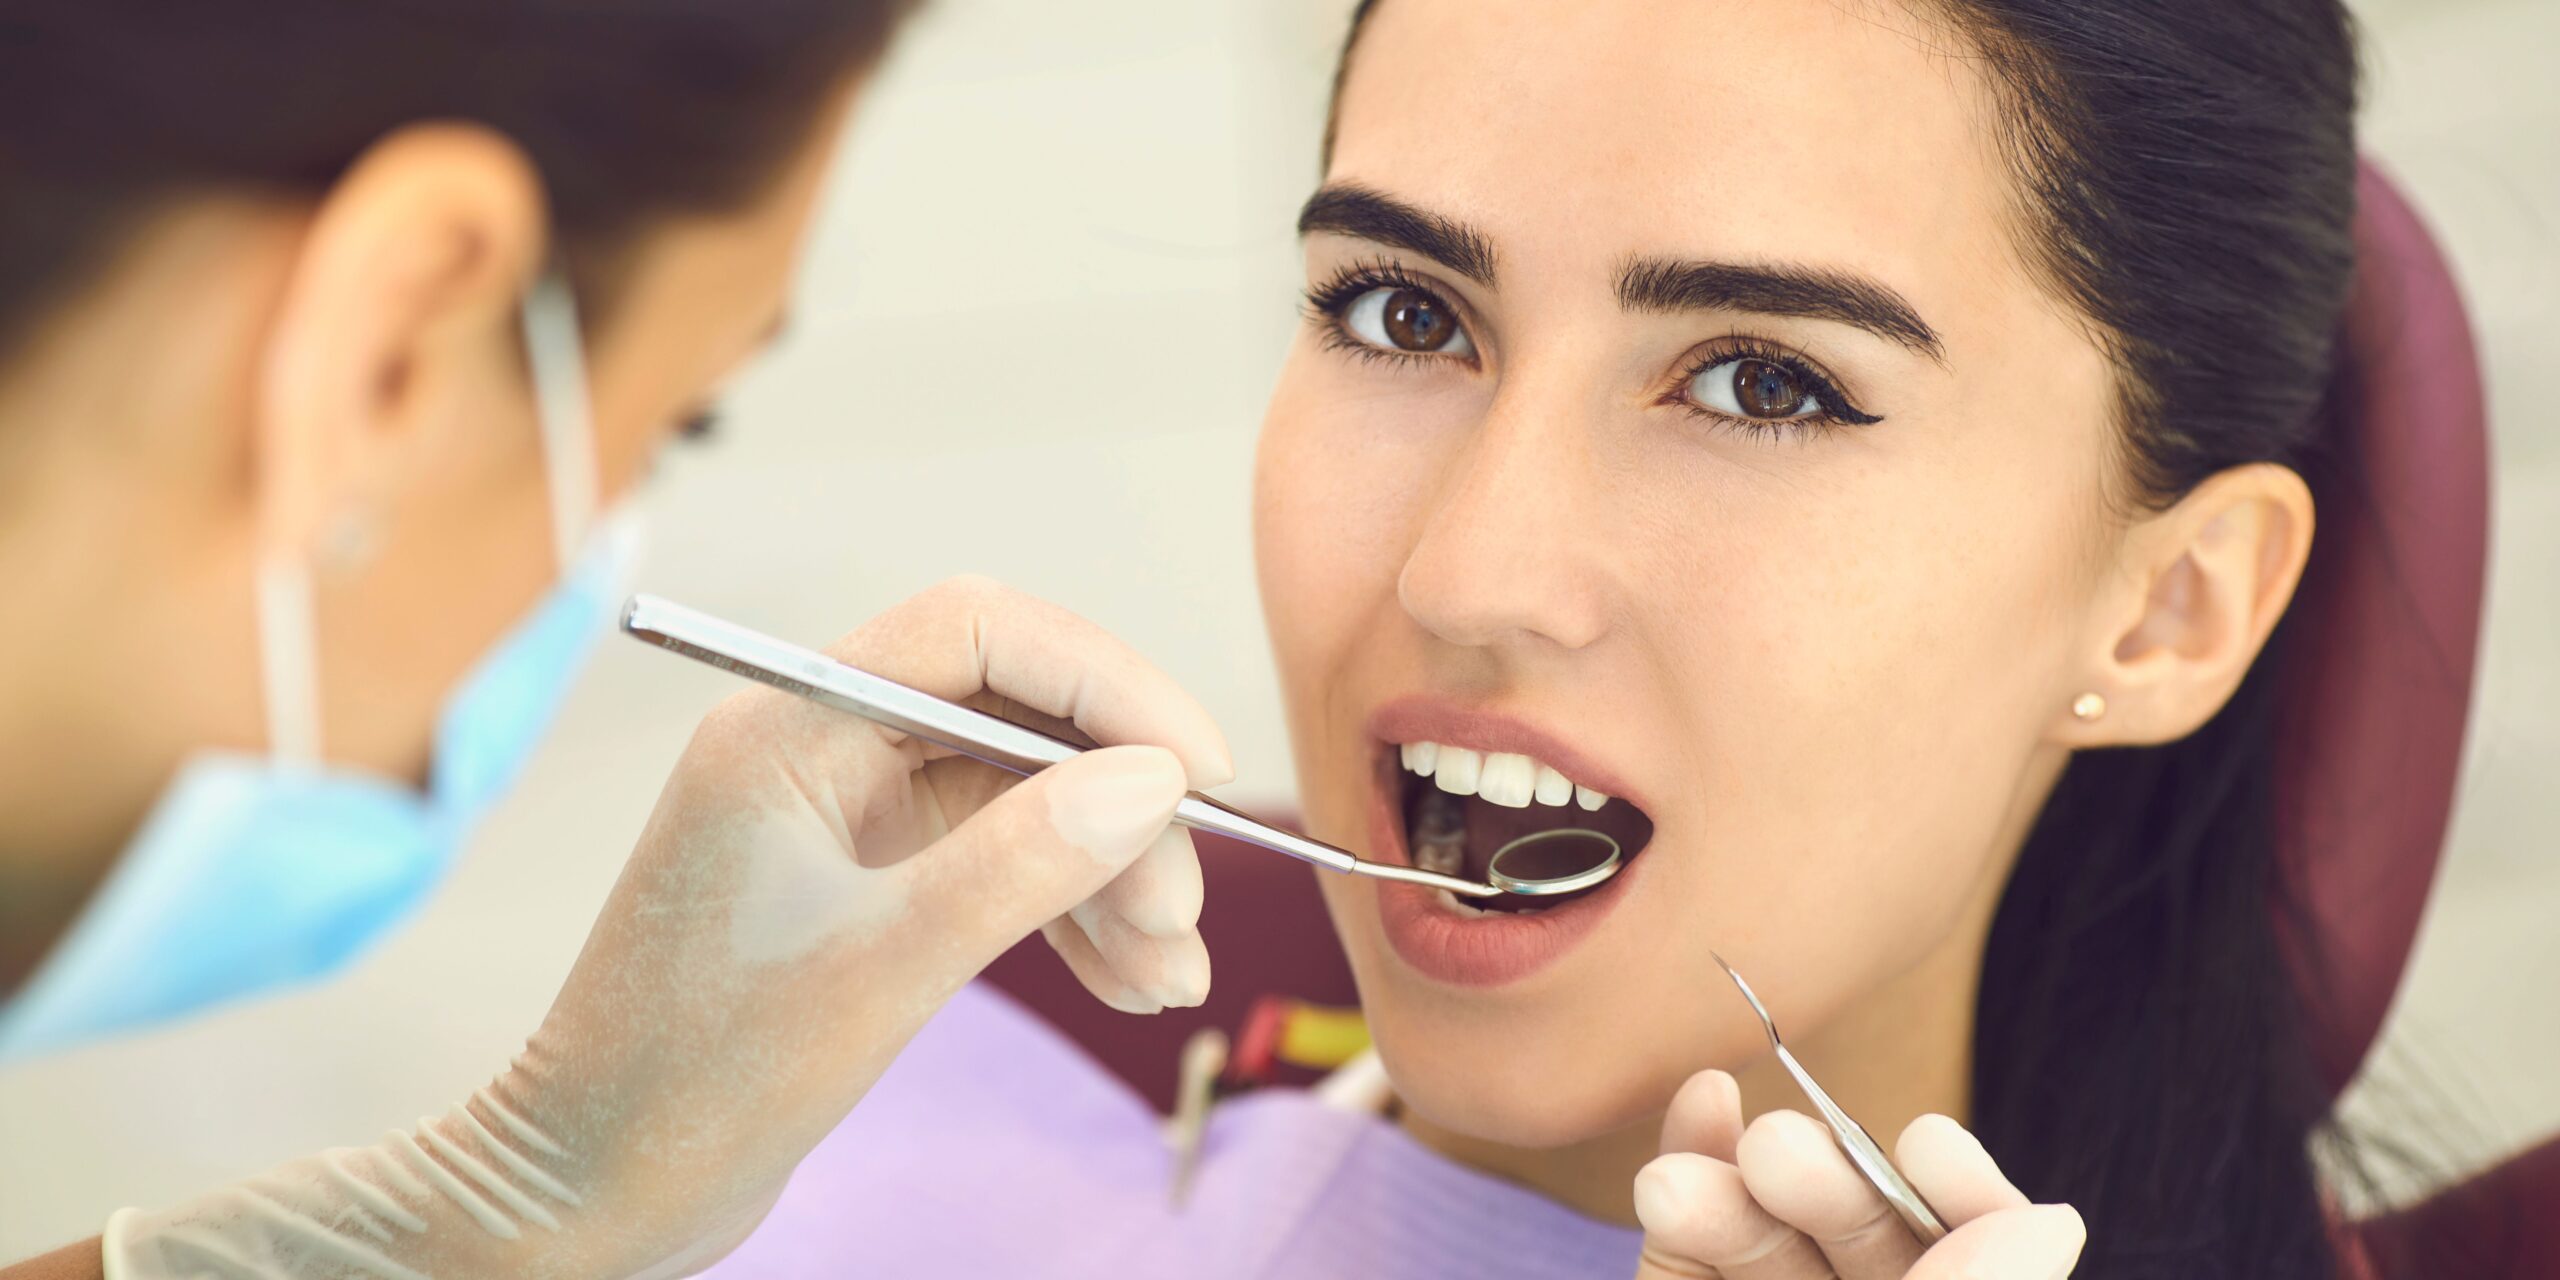 Tooth Decay? Don’t Pull It! Regenerative Endodontics Offers New Hope for Saving Teeth